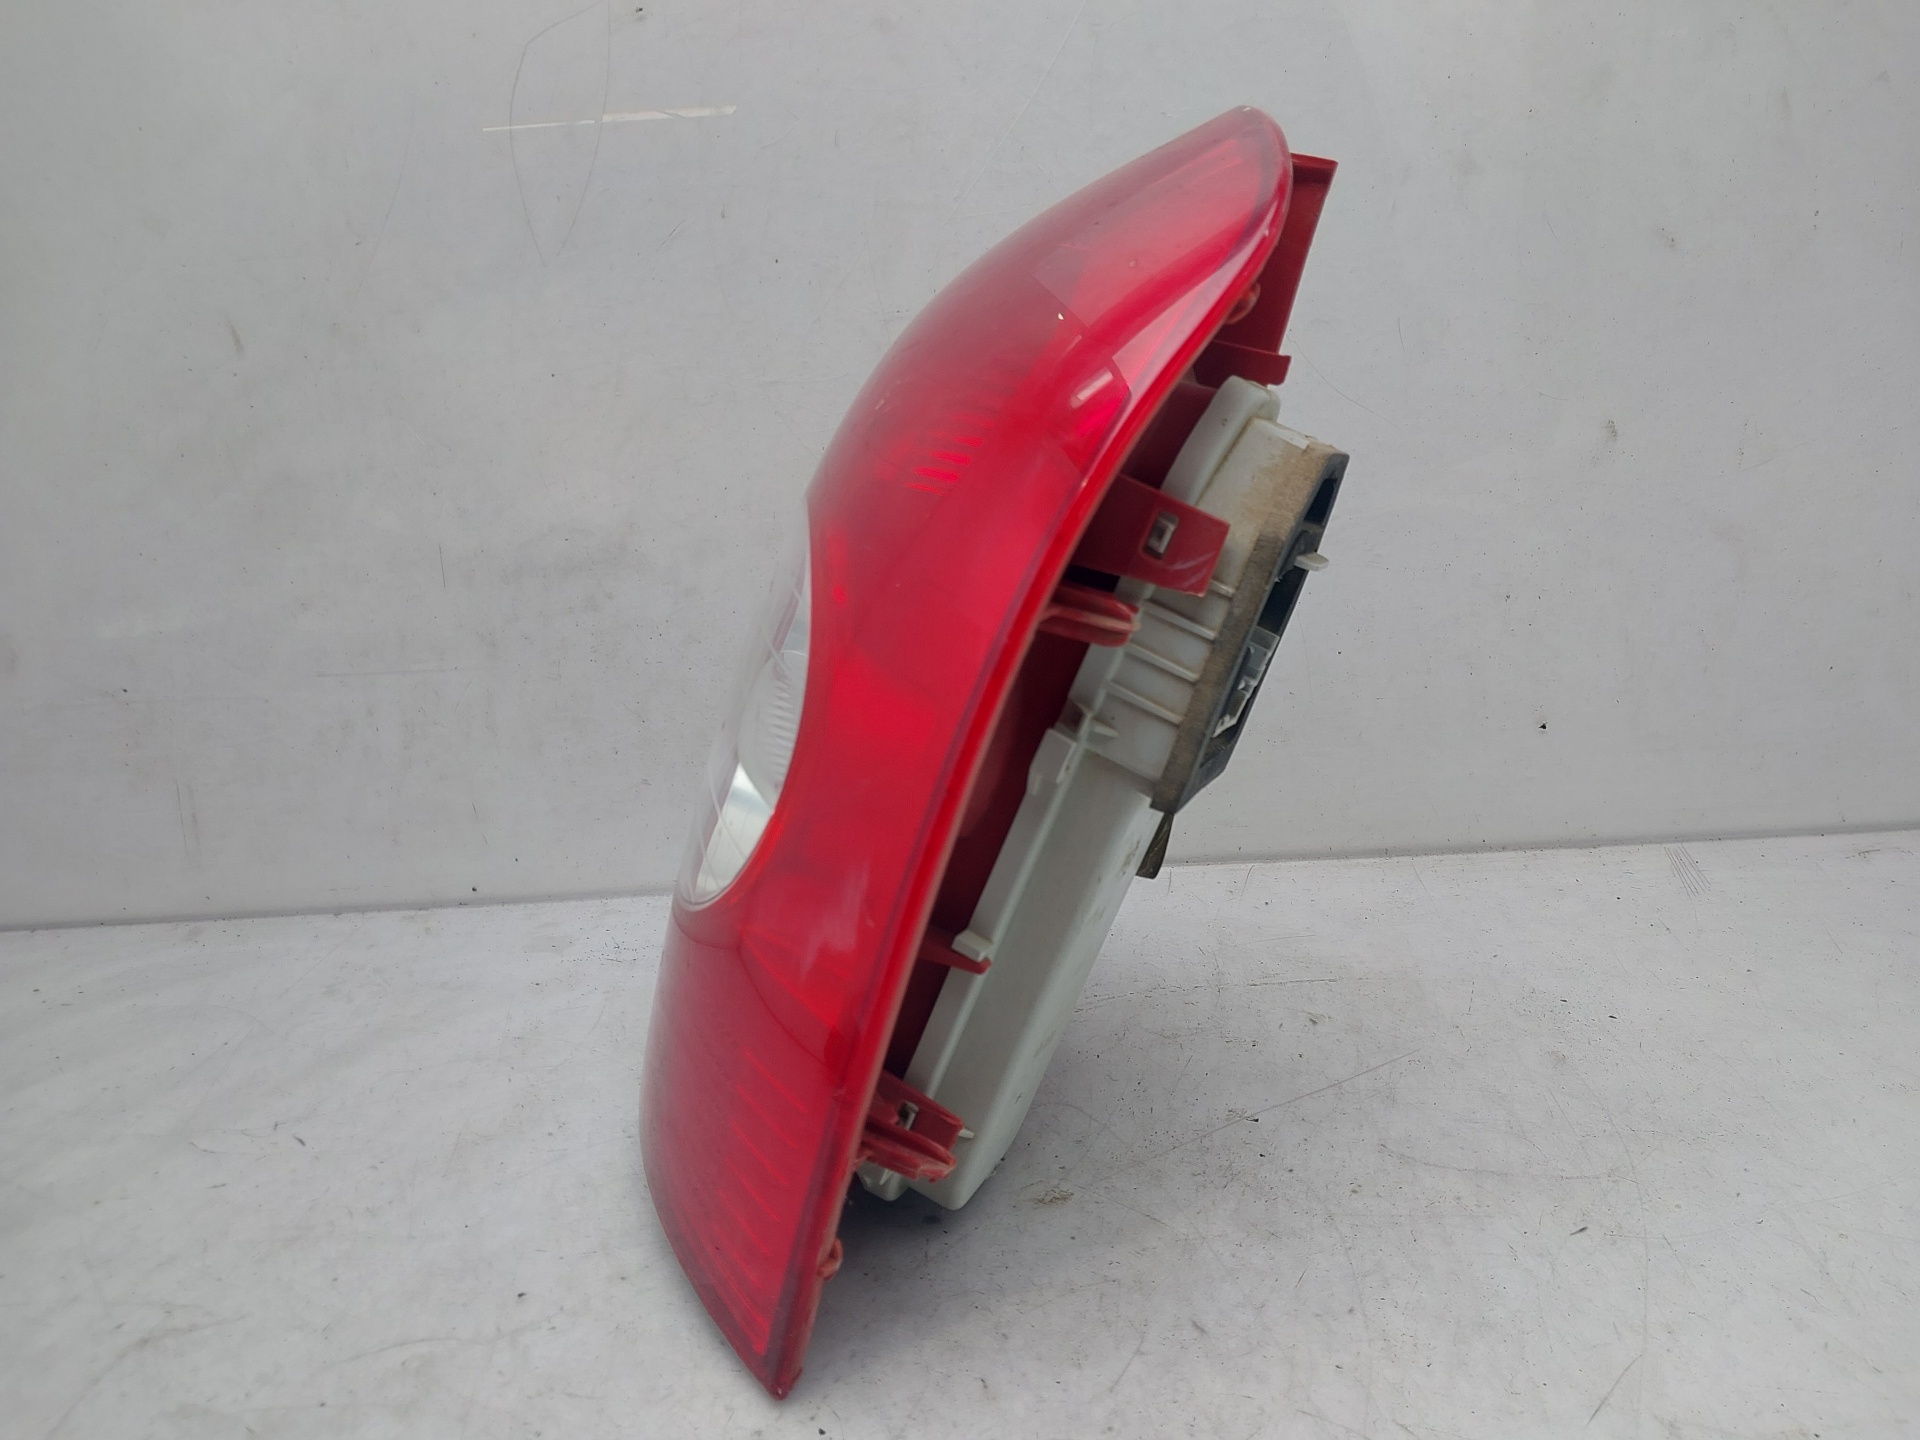 RENAULT Clio 3 generation (2005-2012) Rear Right Taillight Lamp 8200917487 22655880